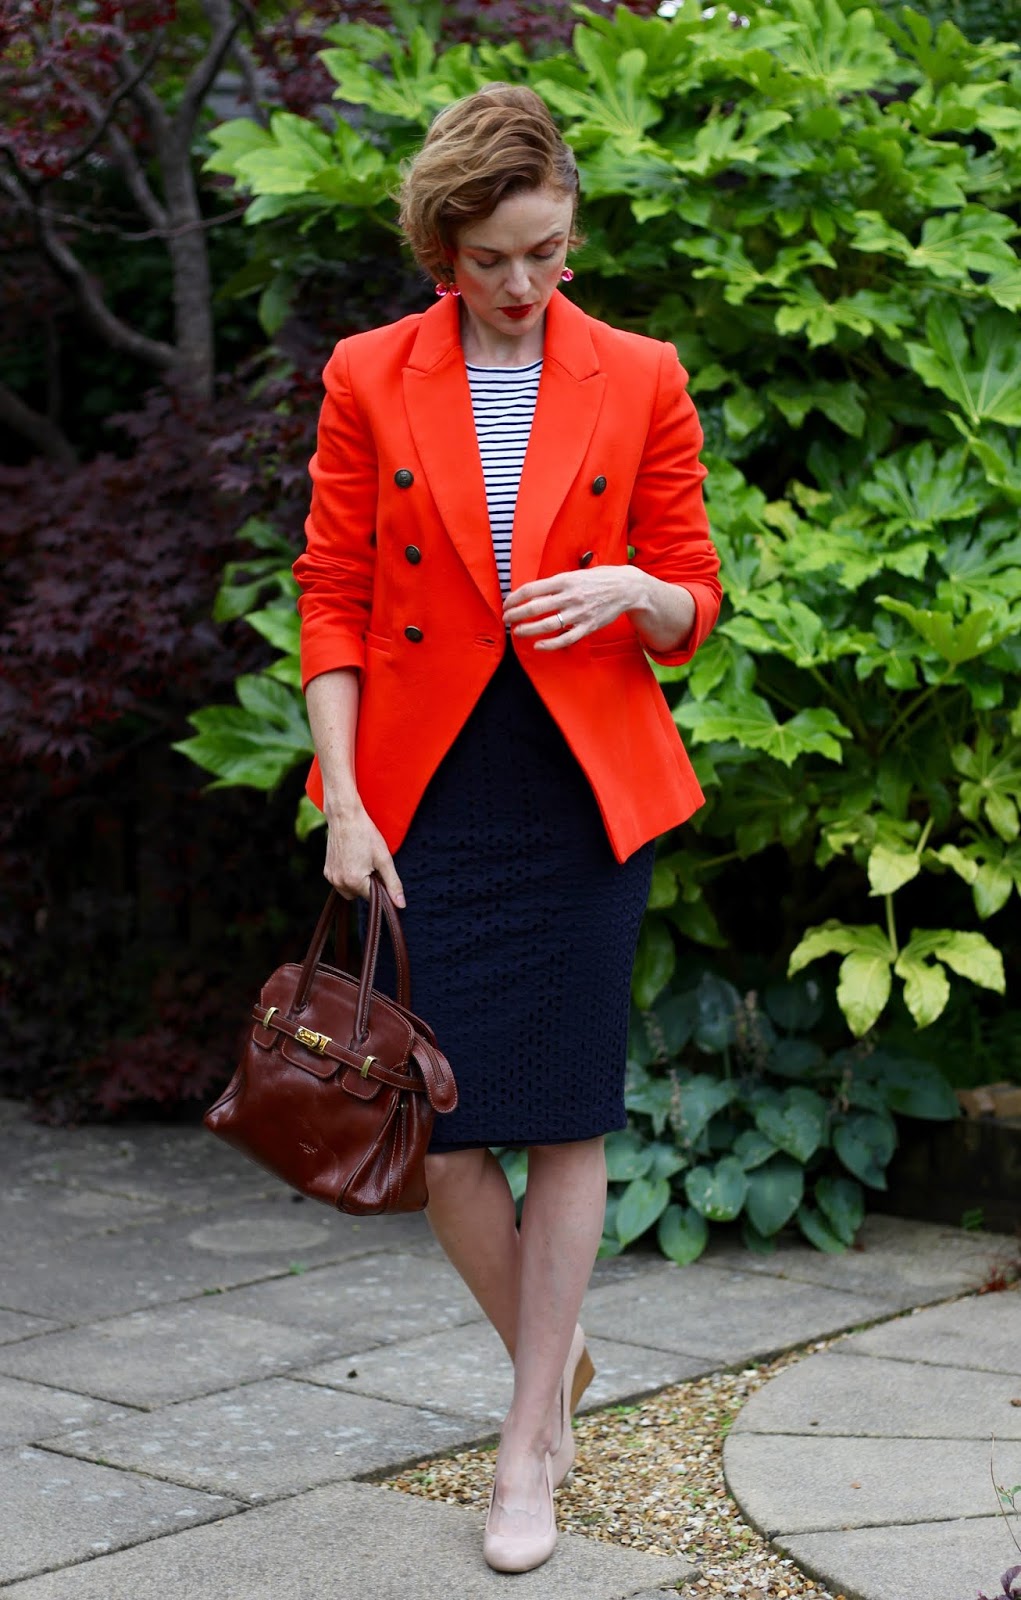 Classic, Bold and Colourful | Smart Casual Autumn Outfit